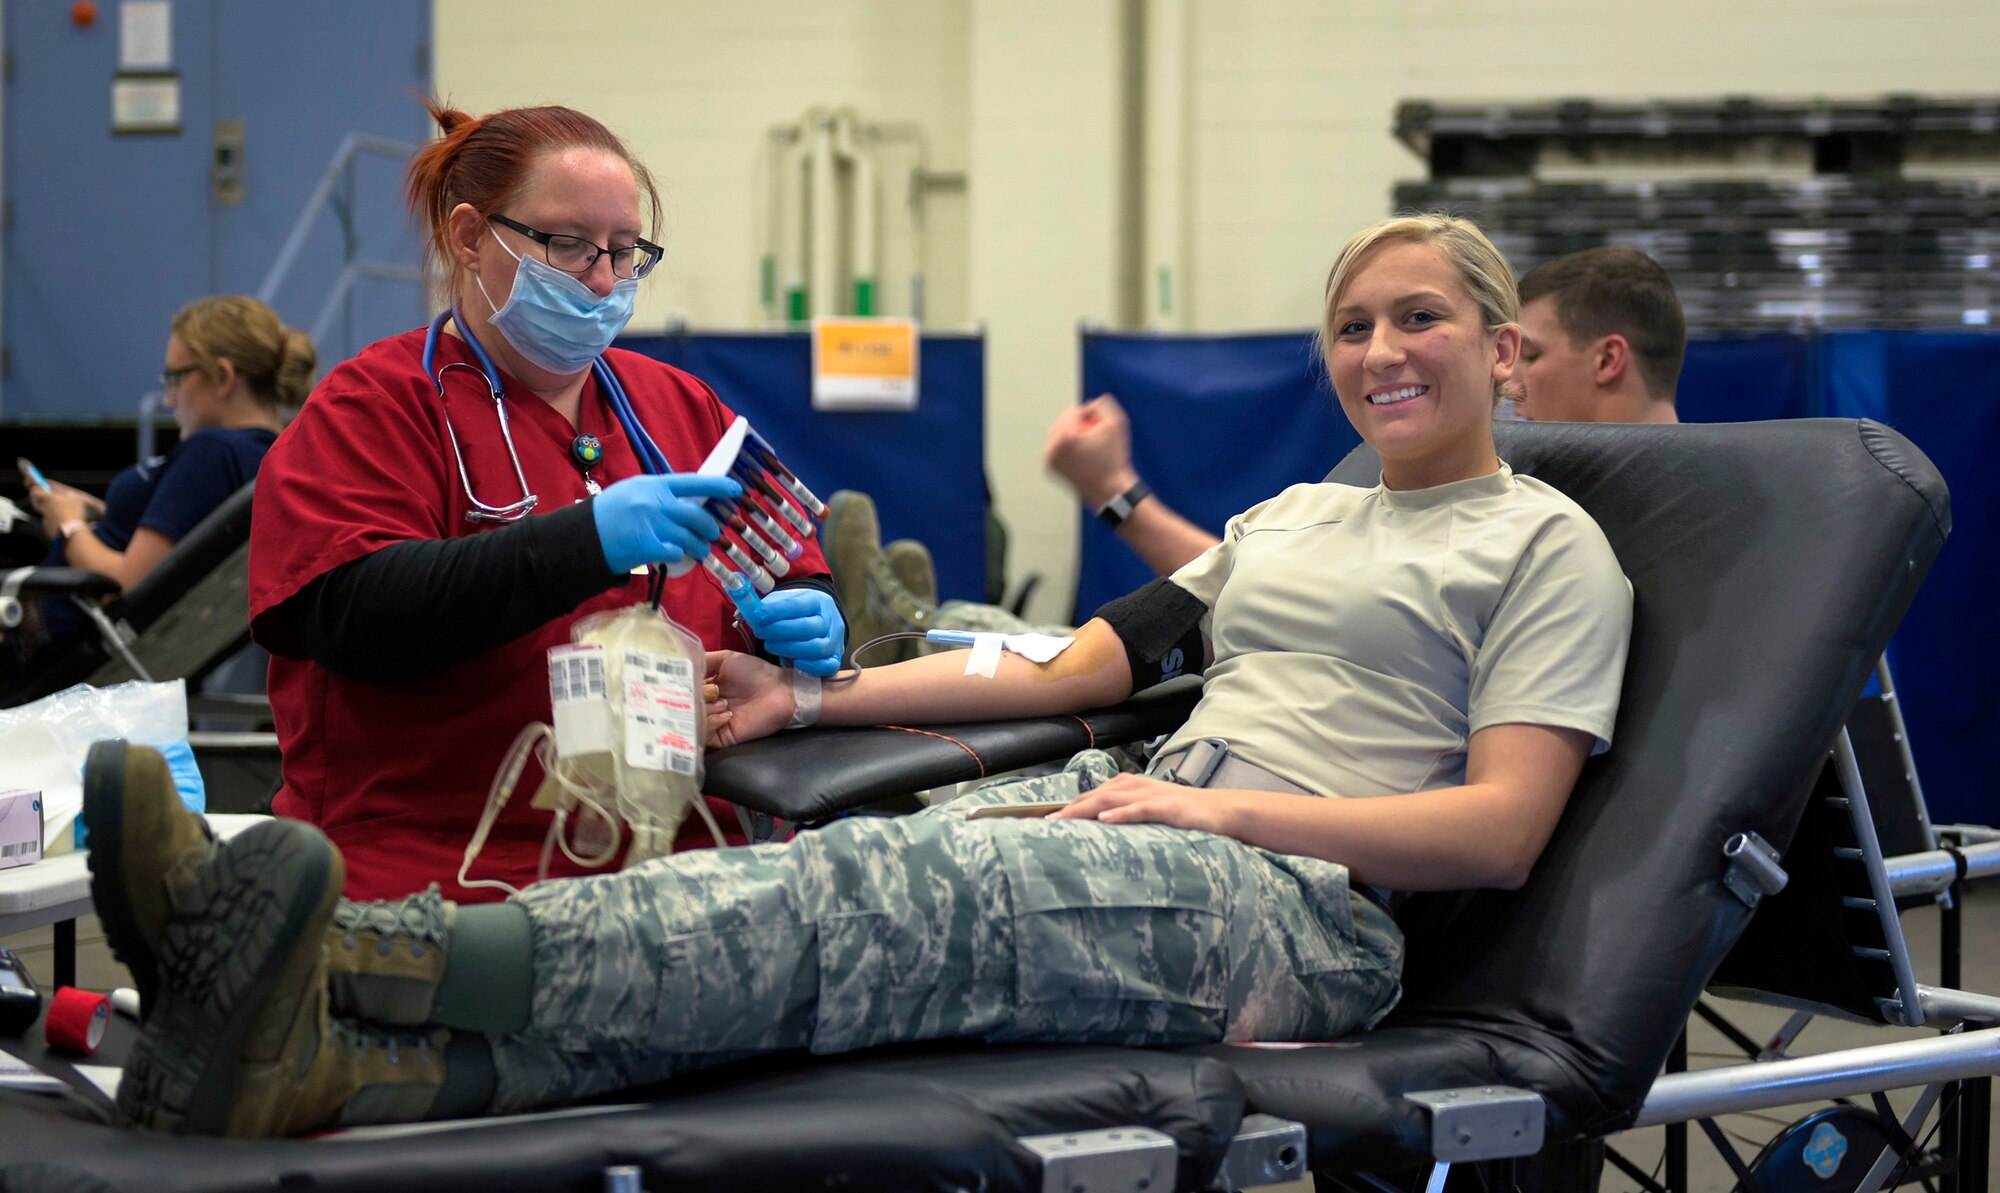 U.S. Air Force Senior Airman Hailey McFall, a fuels journeyman with the 182nd Logistics Readiness Squadron, Illinois Air National Guard, donates blood in Peoria, Ill., Feb. 5, 2017. McFall and other Airmen helped exceed the installation’s goal by 14%, which provided 57 pints of blood during a national emergency need appeal by the American Red Cross. (U.S. Air National Guard photo by Tech. Sgt. Lealan Buehrer)